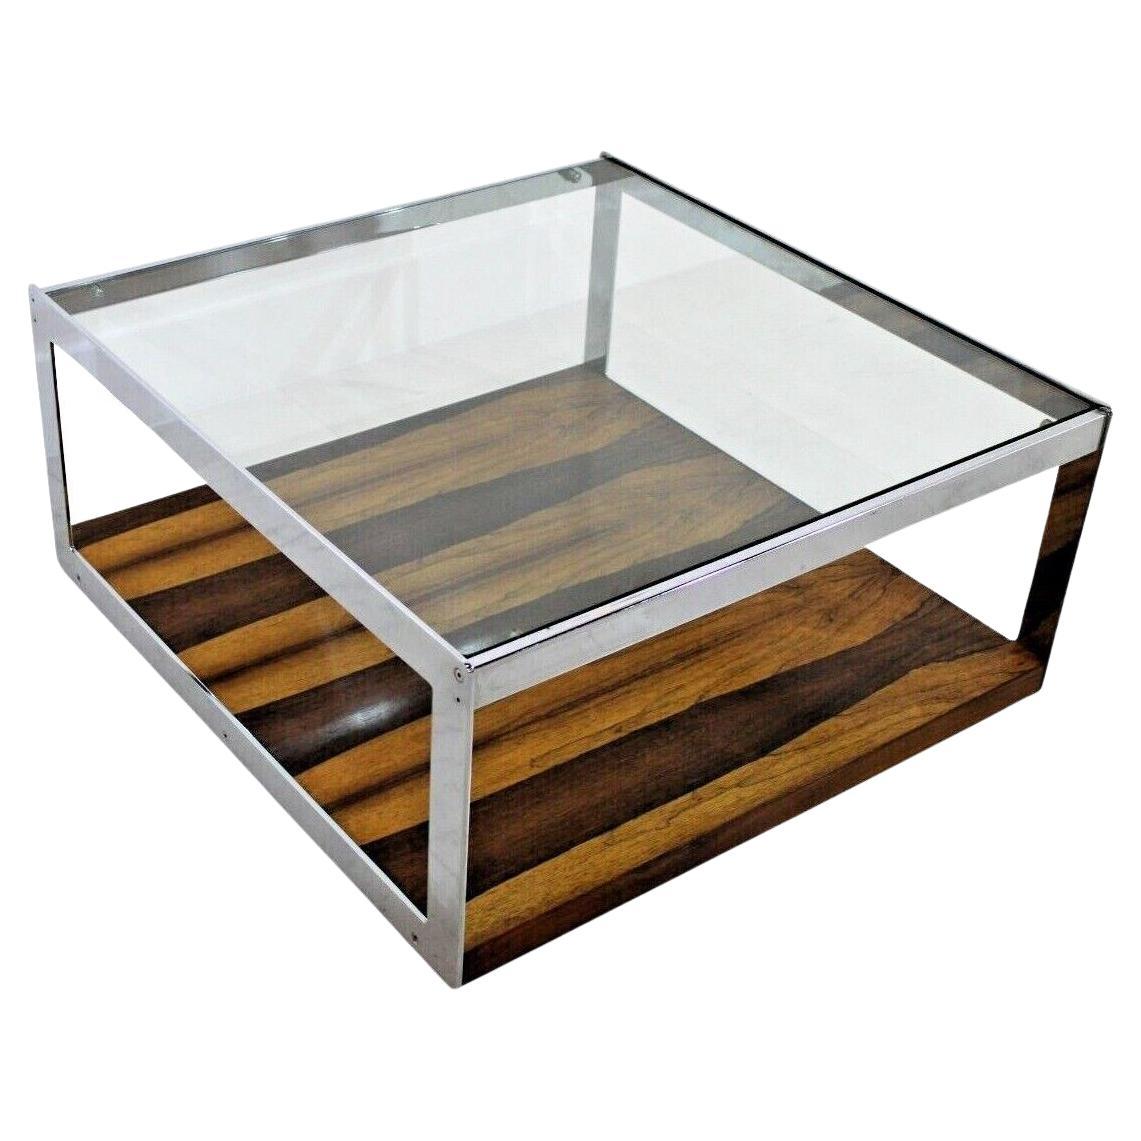 Richard Young Merrow Associates, Coffee Table, Chrome and Rosewood, 1970's